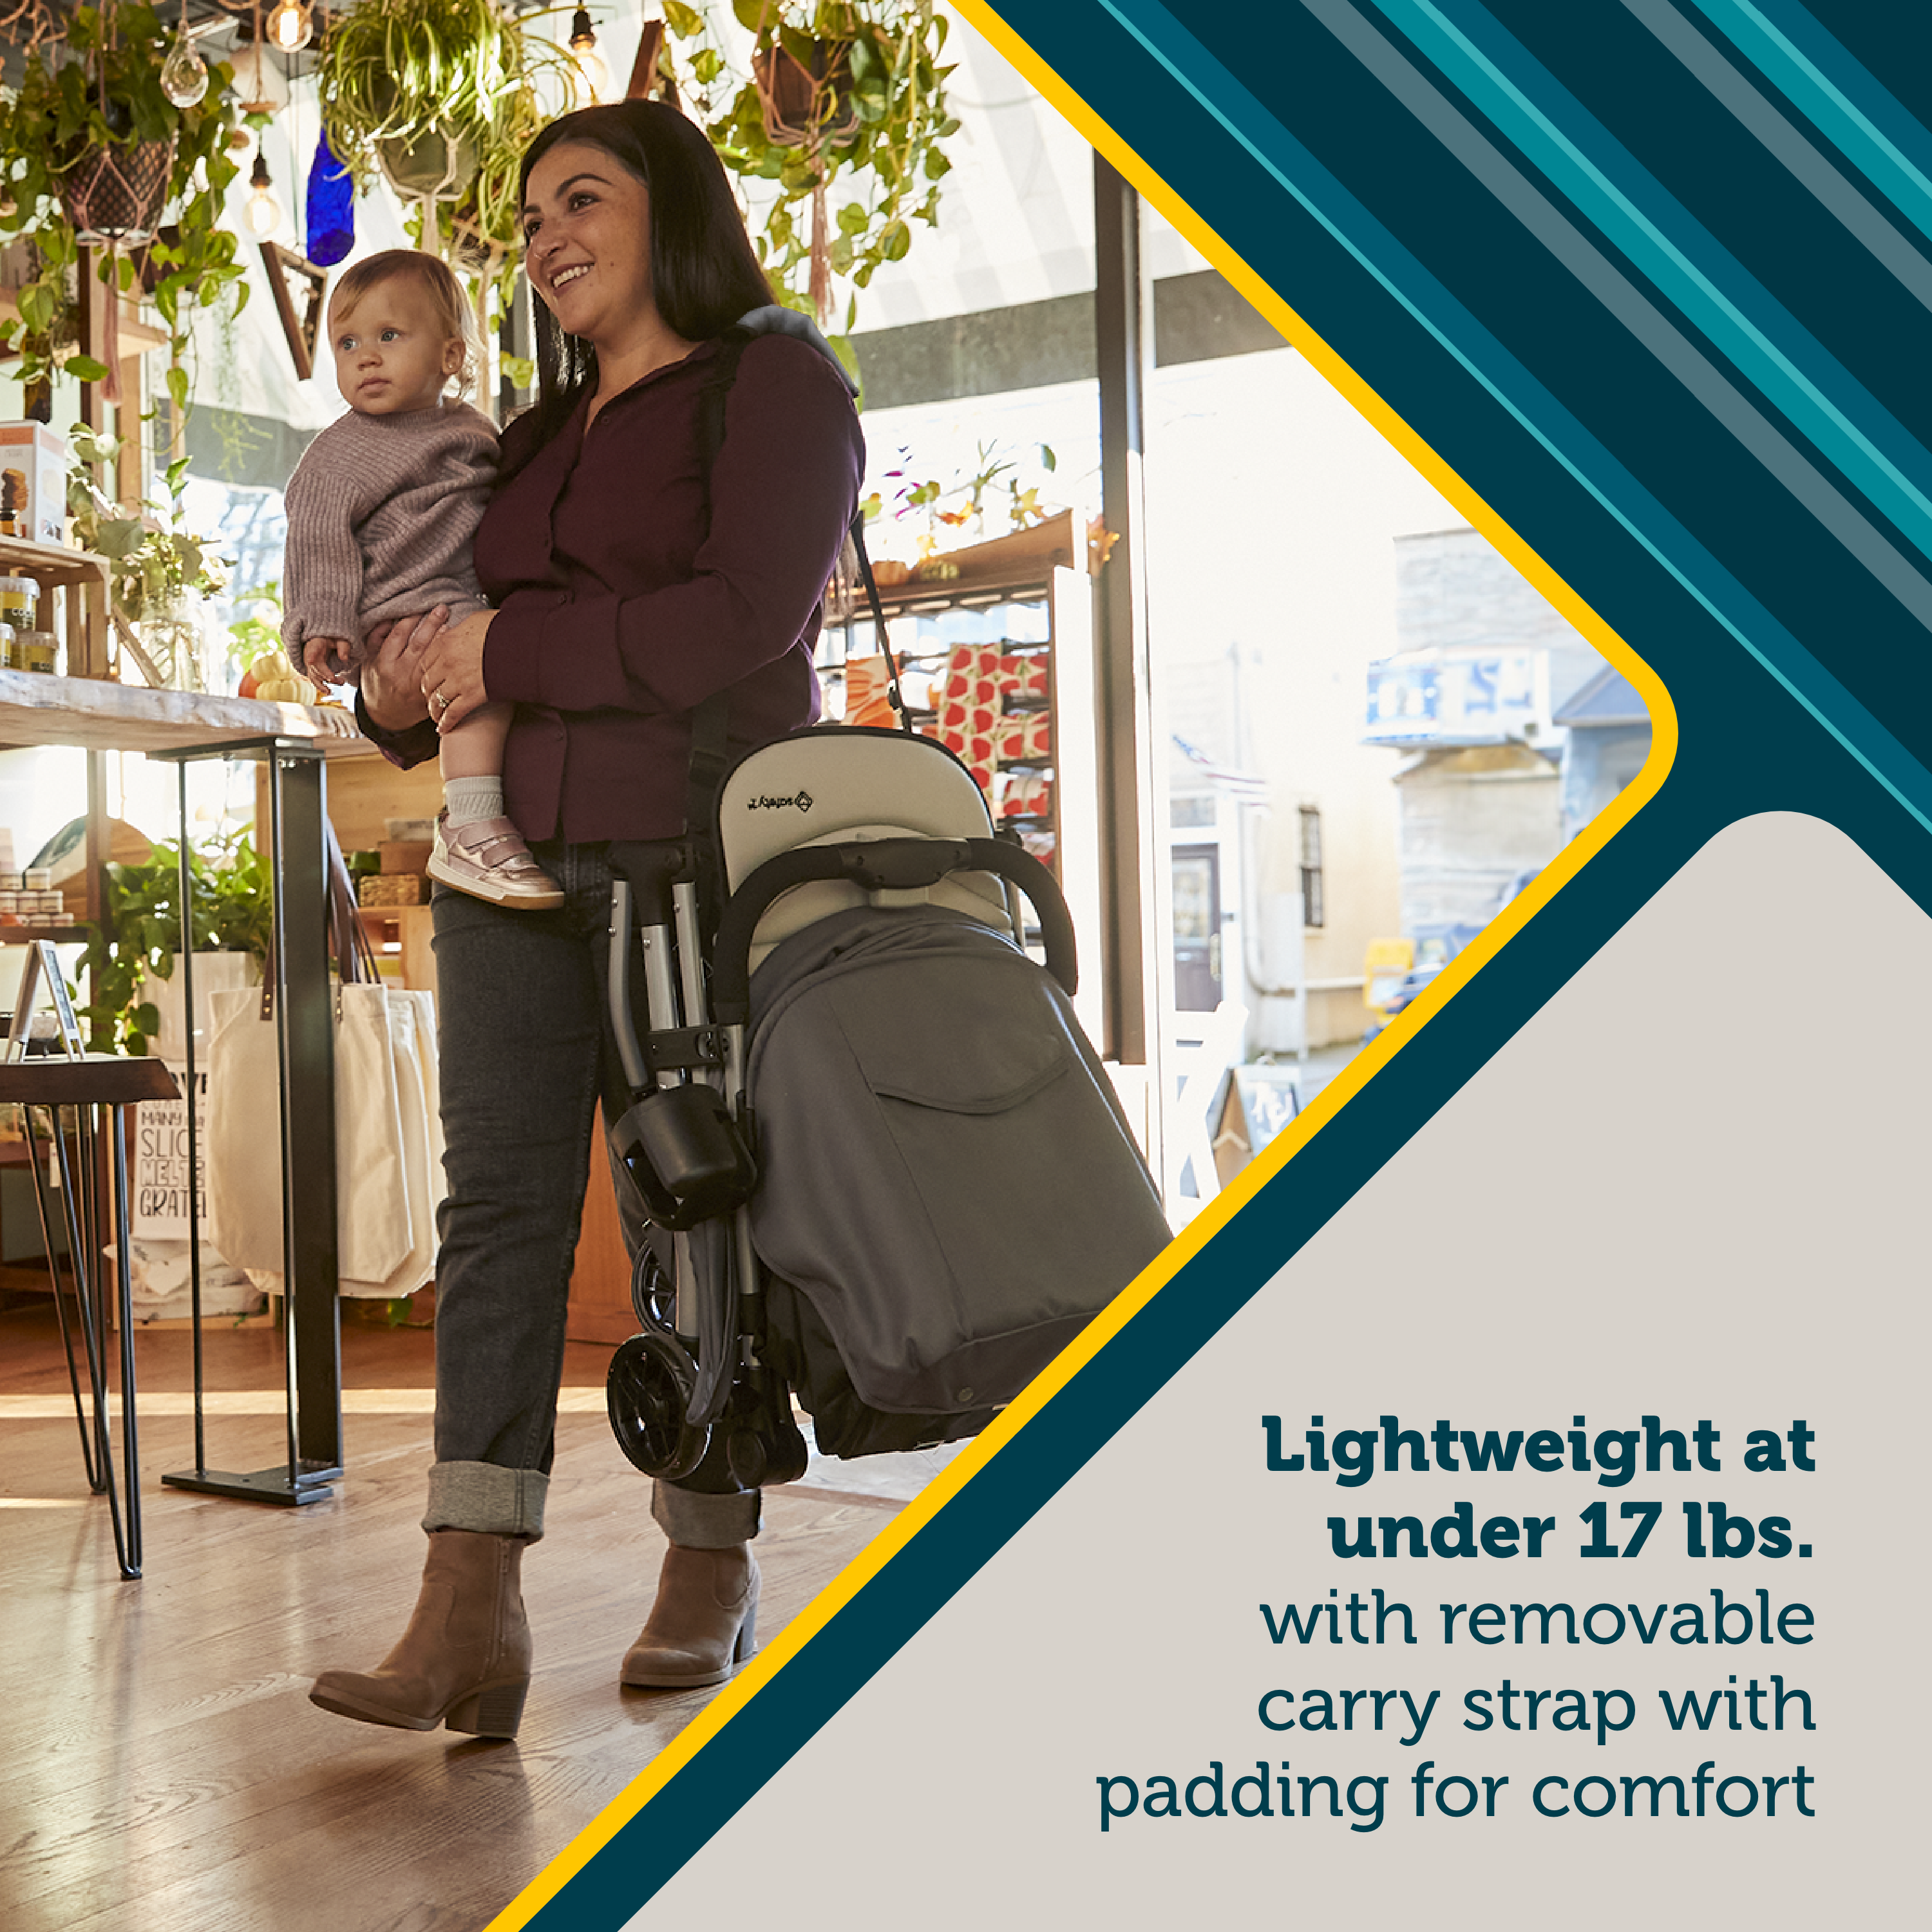 Easy-Fold Compact Stroller - lightweight at under 17 lbs. with removable carry strap with padding for comfort